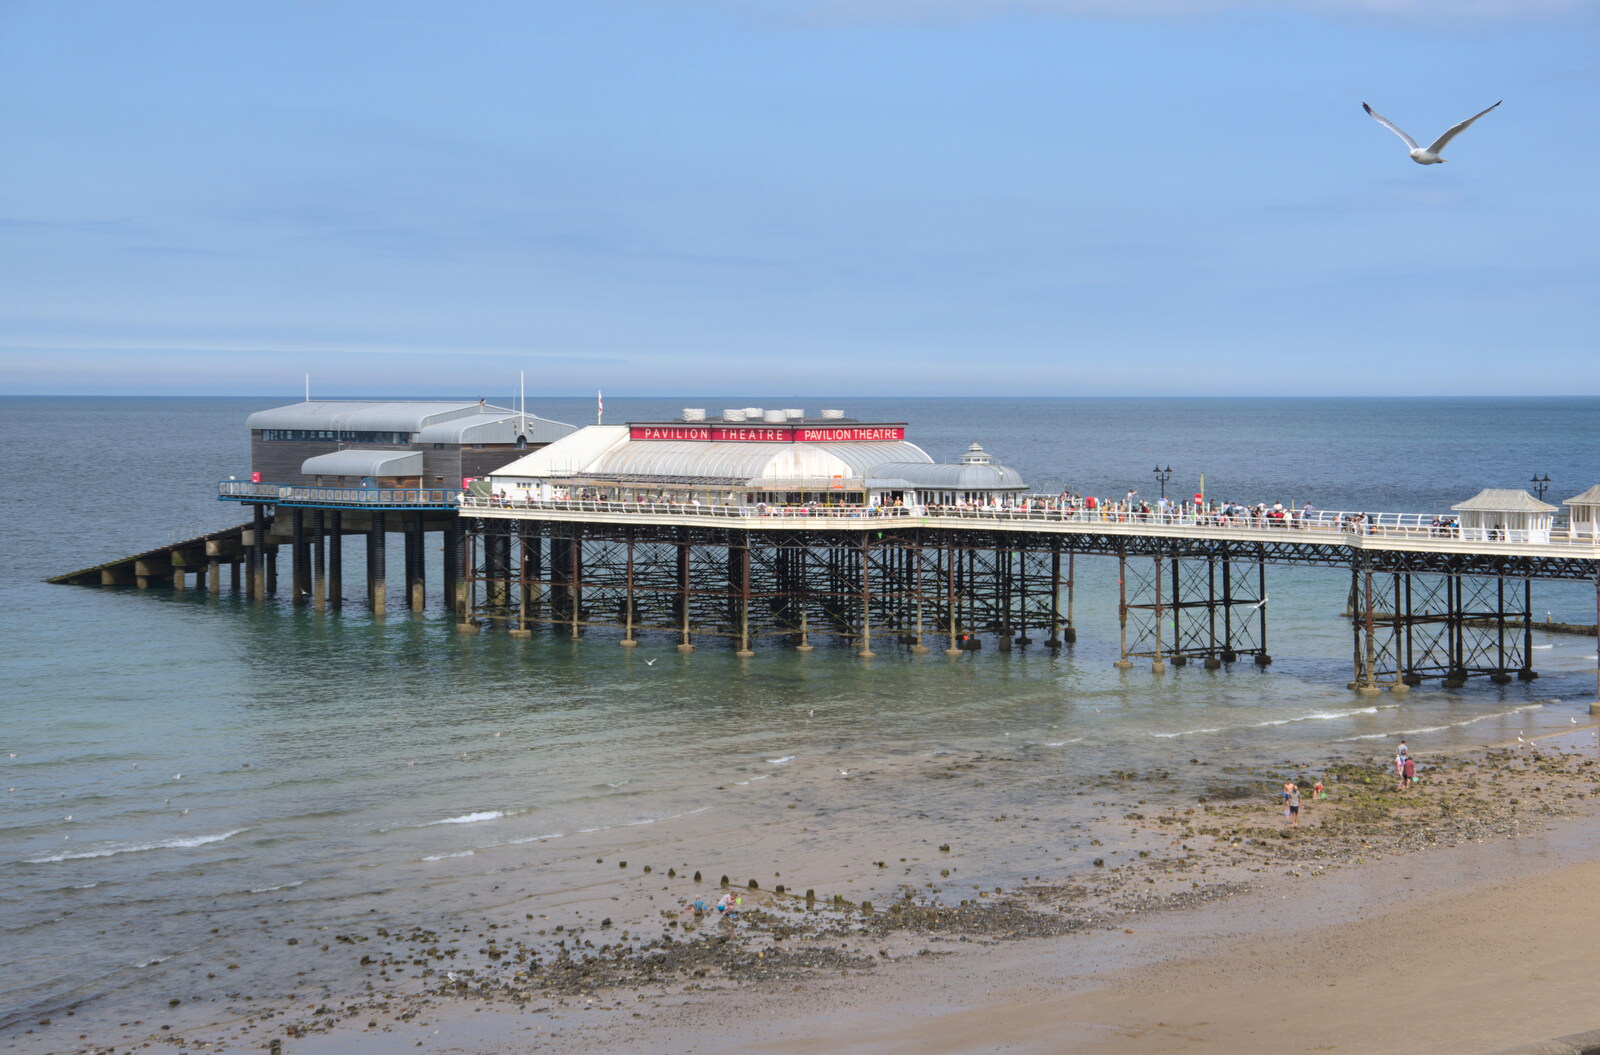 Cromer Pier from Camping on the Coast, East Runton, North Norfolk - 25th July 2020